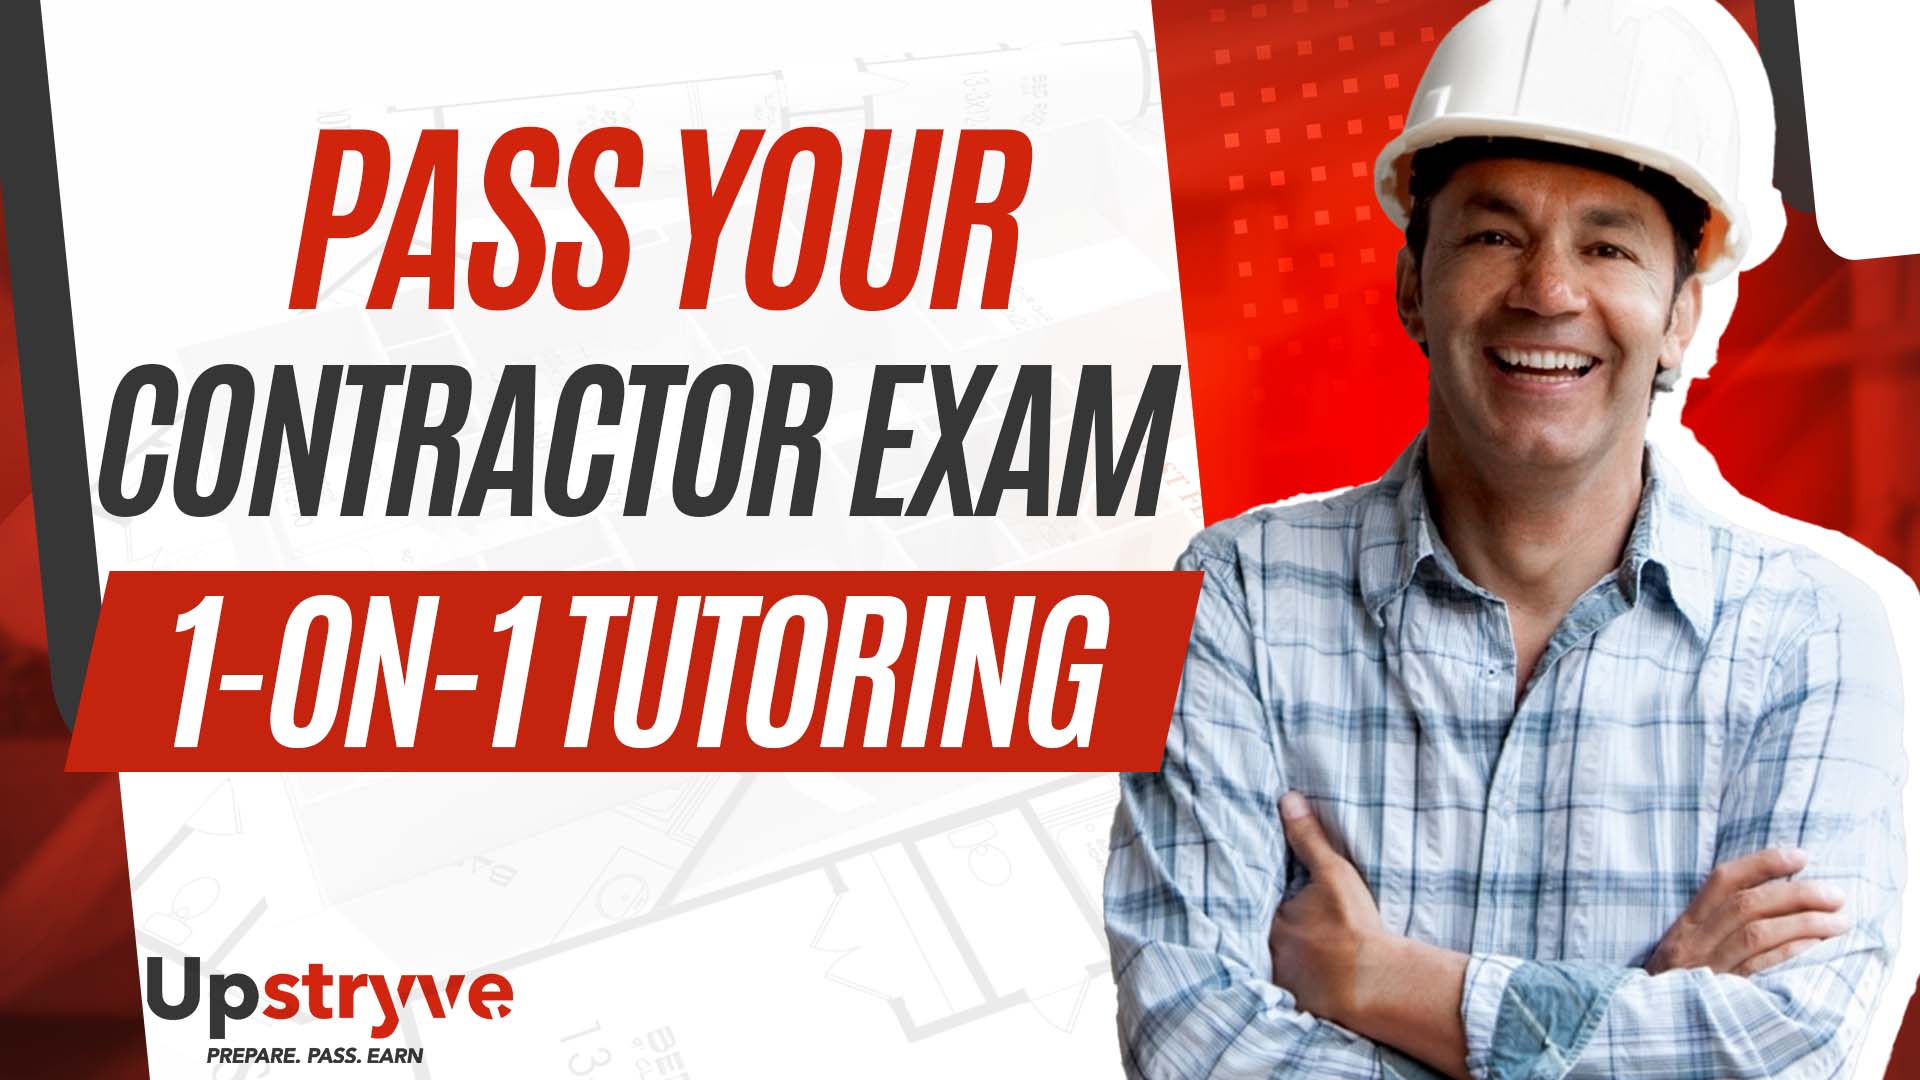 Schedule a tutoring session today by calling 877-938-1888. Upstryve tutors are your best contractor exam prep resource. Each month our team of tutors grows and our reach expands though a multitude of trades. Our tutors are equipped to help you in any trade whether its electrical, general, HVAC, plumbing, building and more. They are either active or retired contractors with years of experience in the field and as instructors. Match with a tutor today and let them guide you to success.